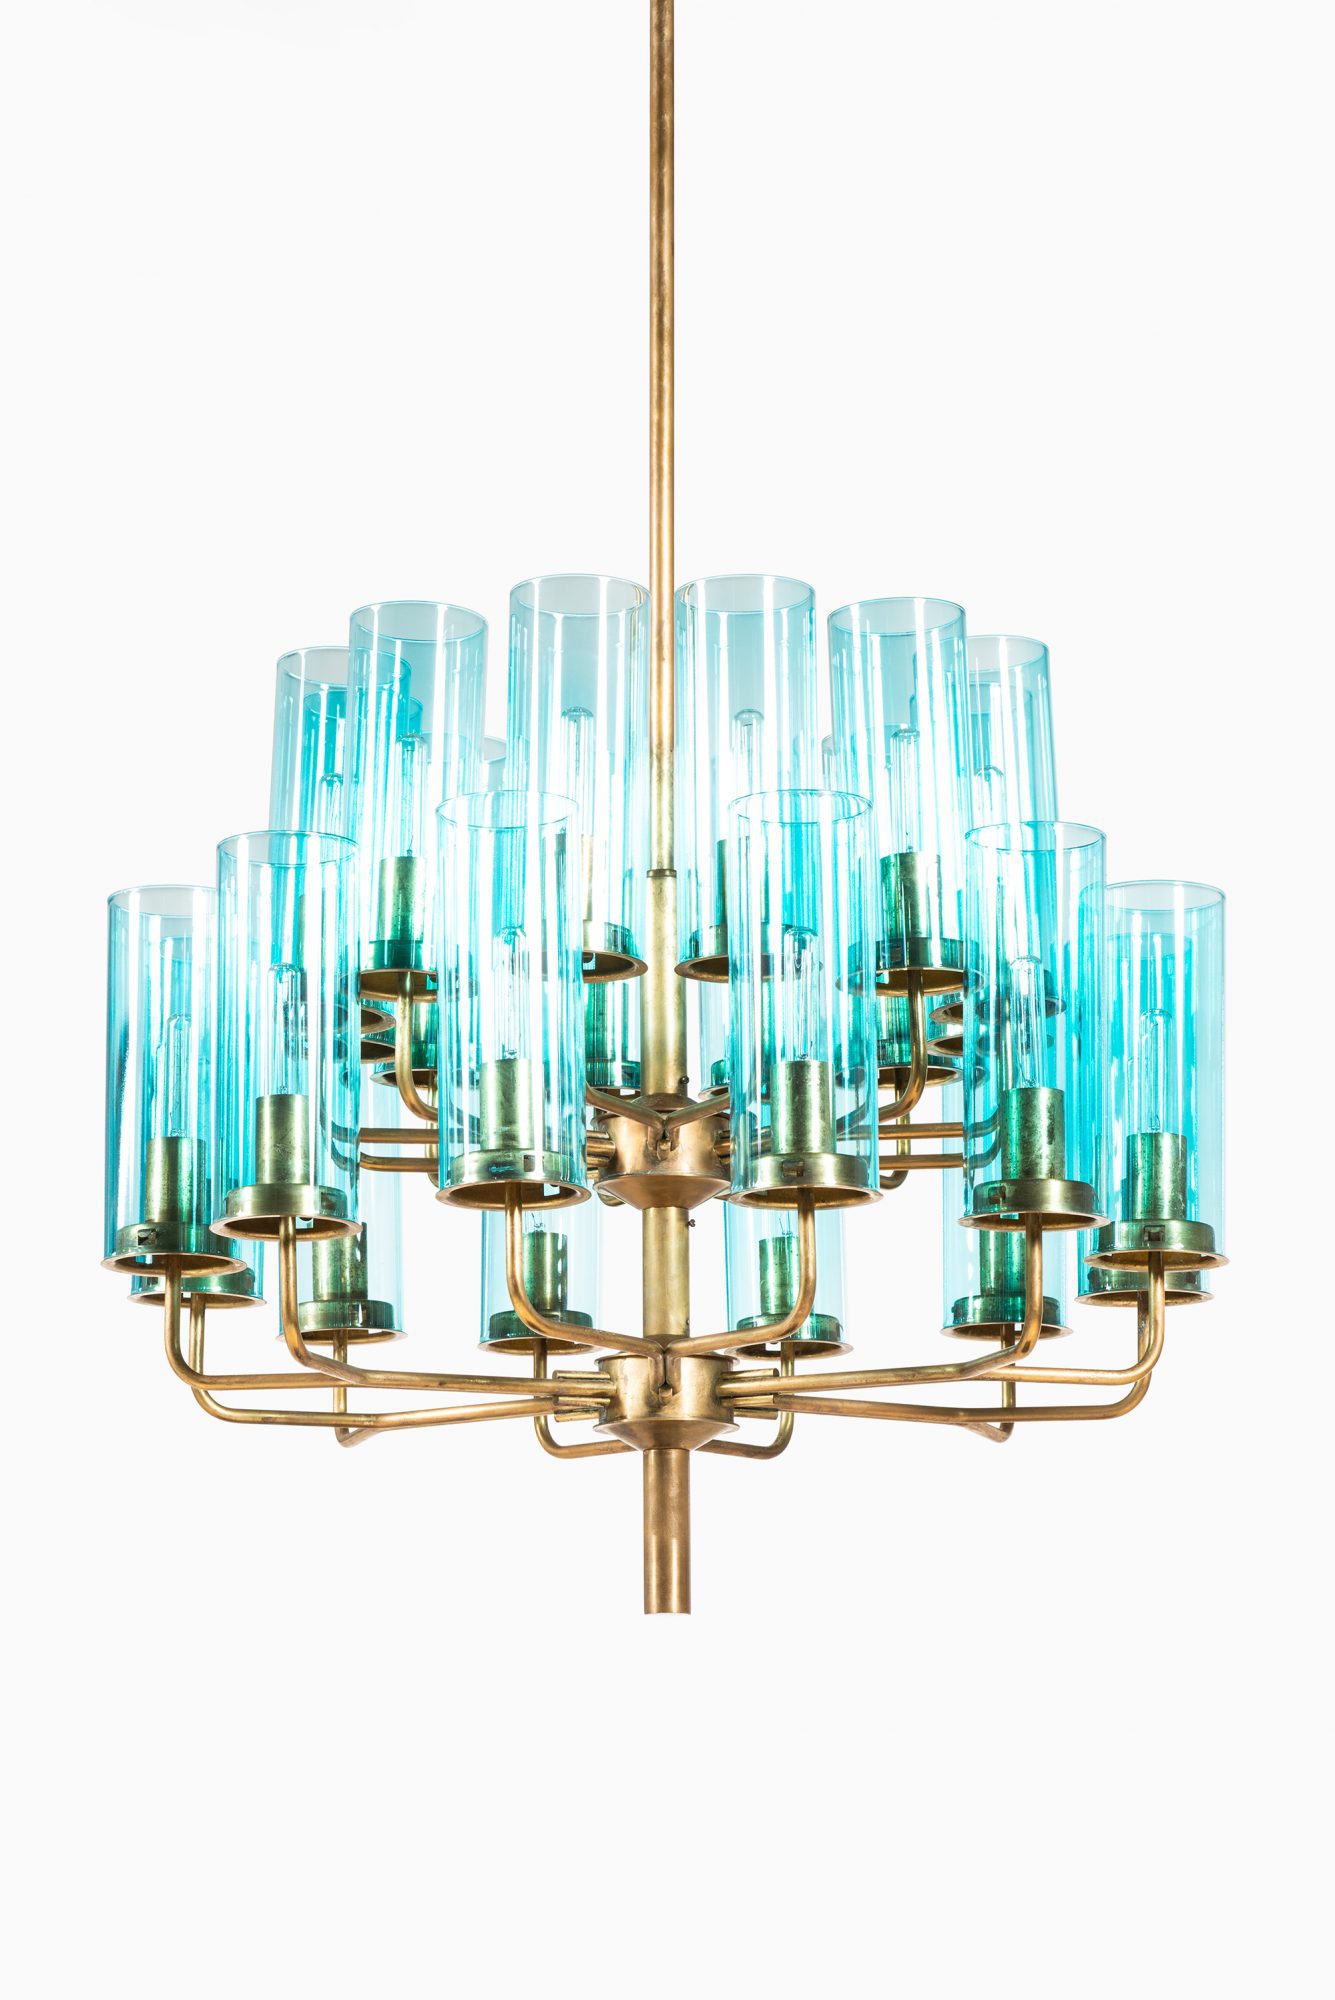 Hans-Agne Jakobsson T-434/24 ceiling lamp in brass and blue glass at Studio Schalling